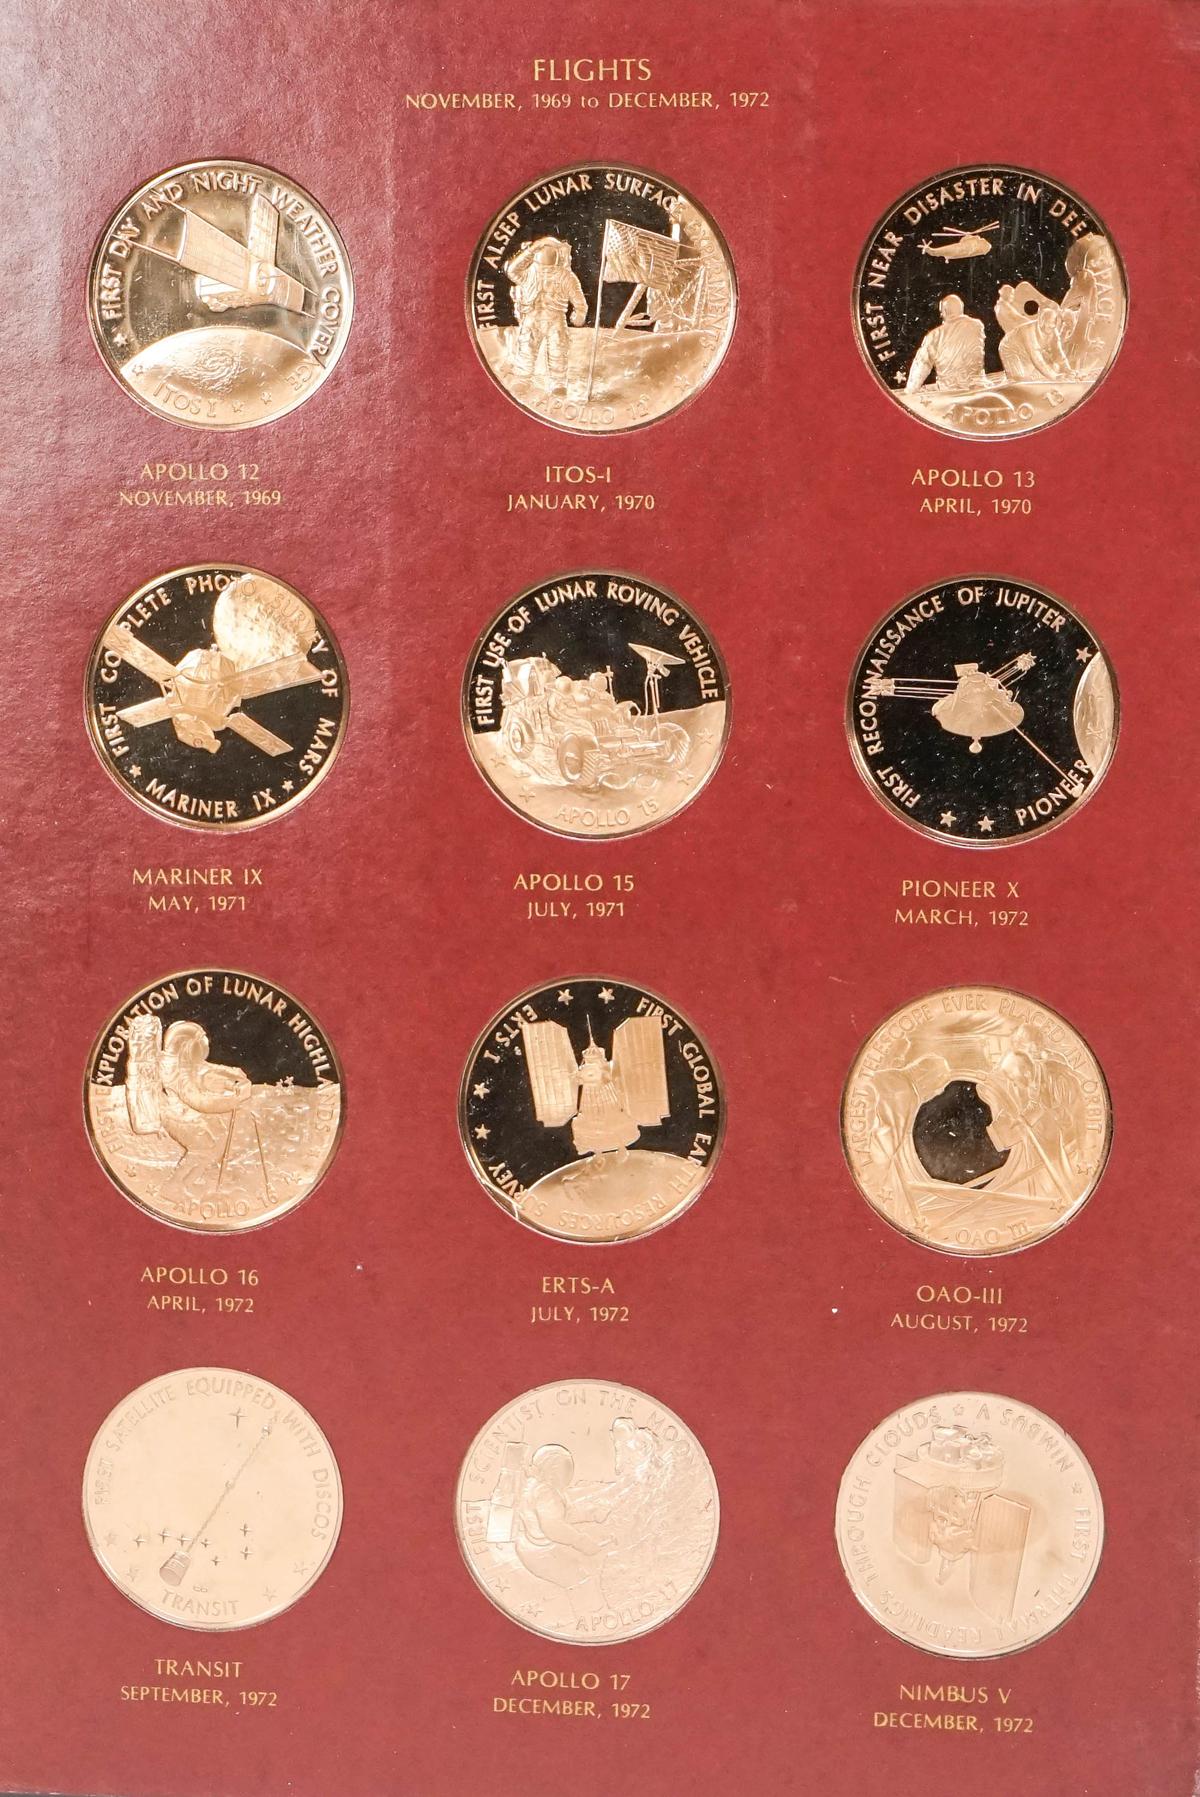 America In Space First Edition Solid Brass Proof Set